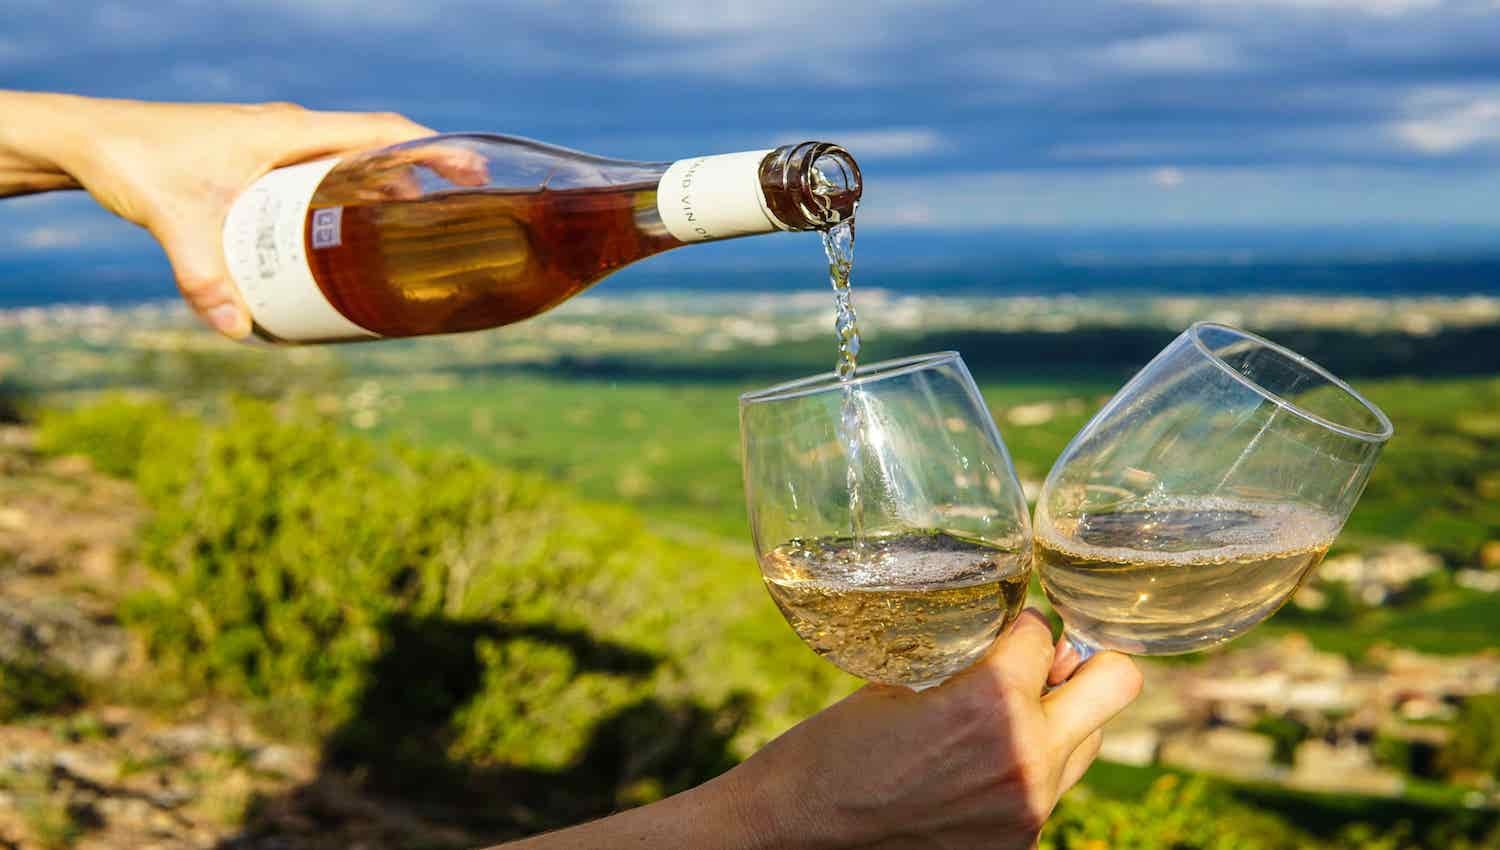 Wine being poured into glasses amidst scenic landscape